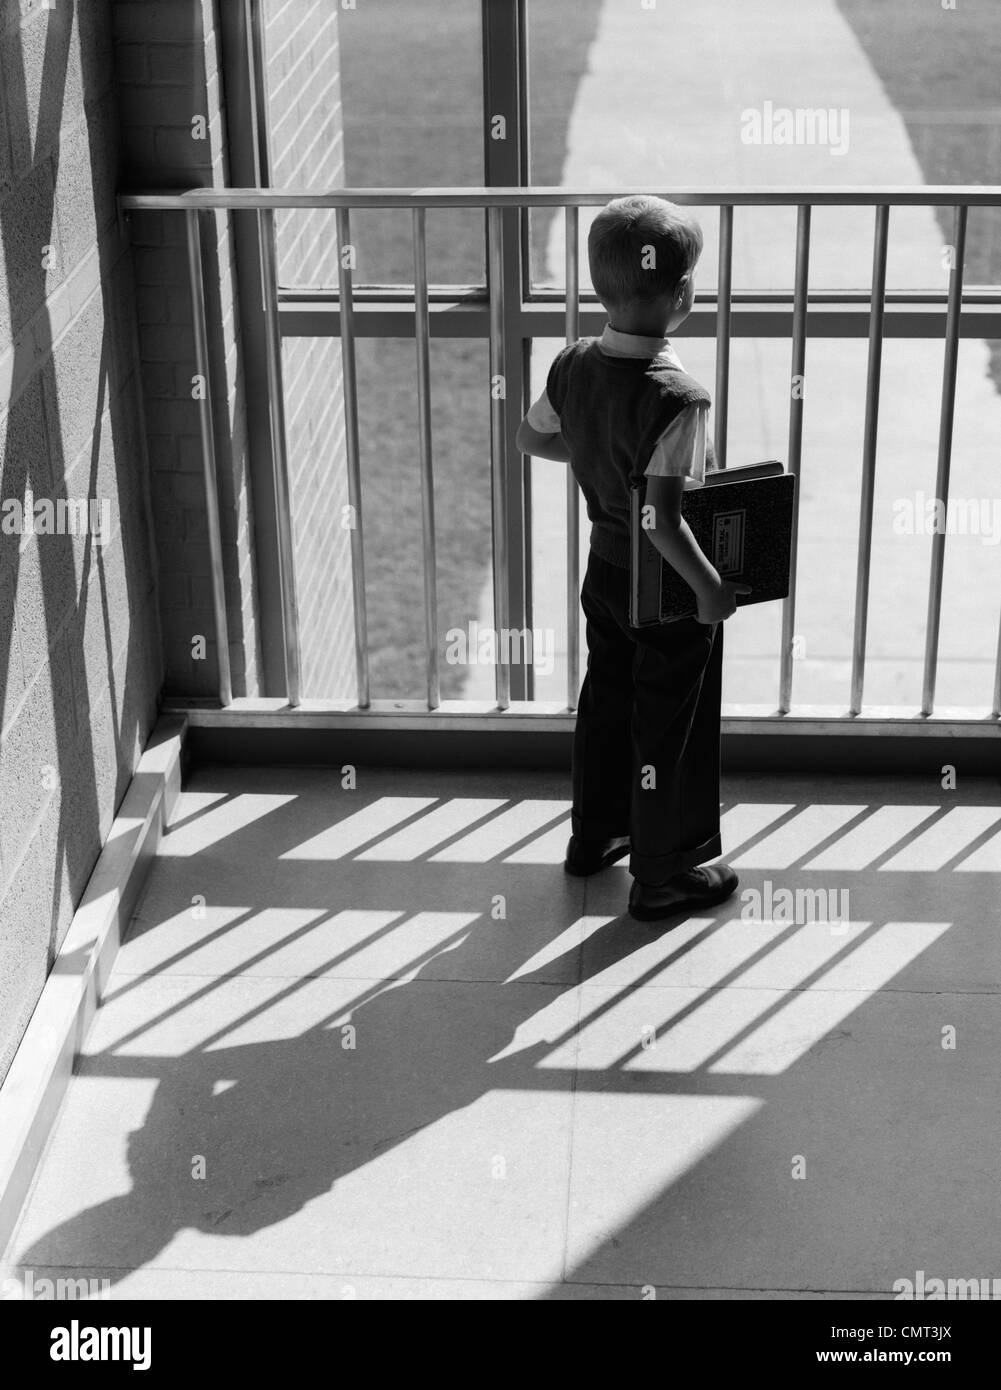 1950s SCHOOLBOY WITH BOOKS UNDER ARM LOOKING OUT WINDOW BETWEEN BARS OF RAILING SHADOW CAST BEHIND HIM Stock Photo